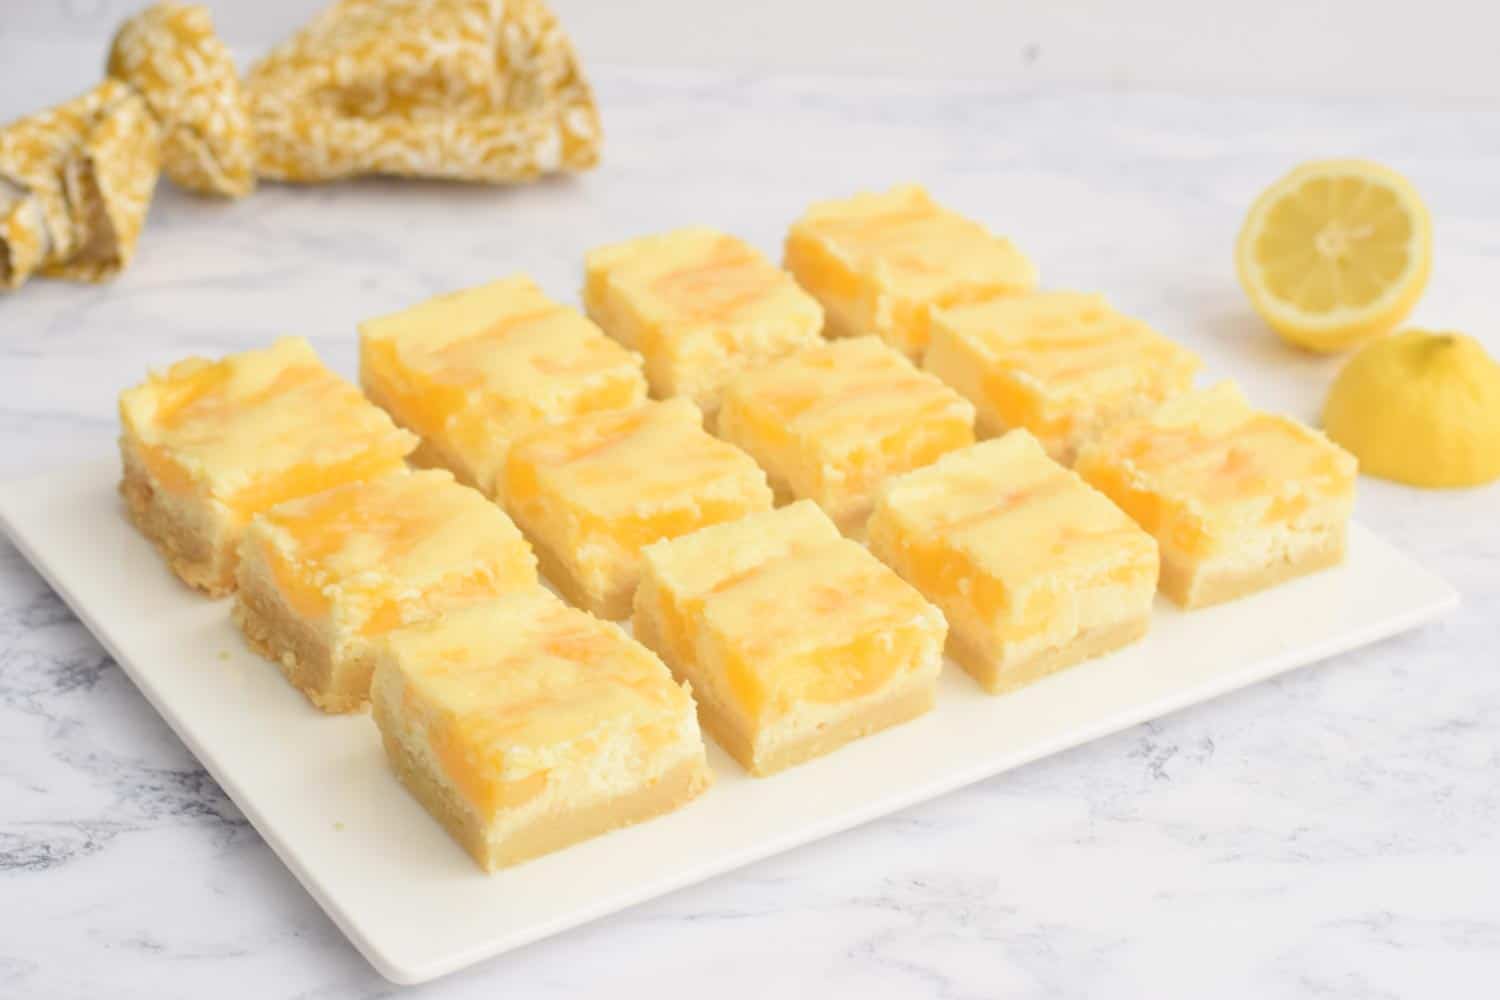 A plate with gluten-free lemon cheesecake bars and a lemon next to it